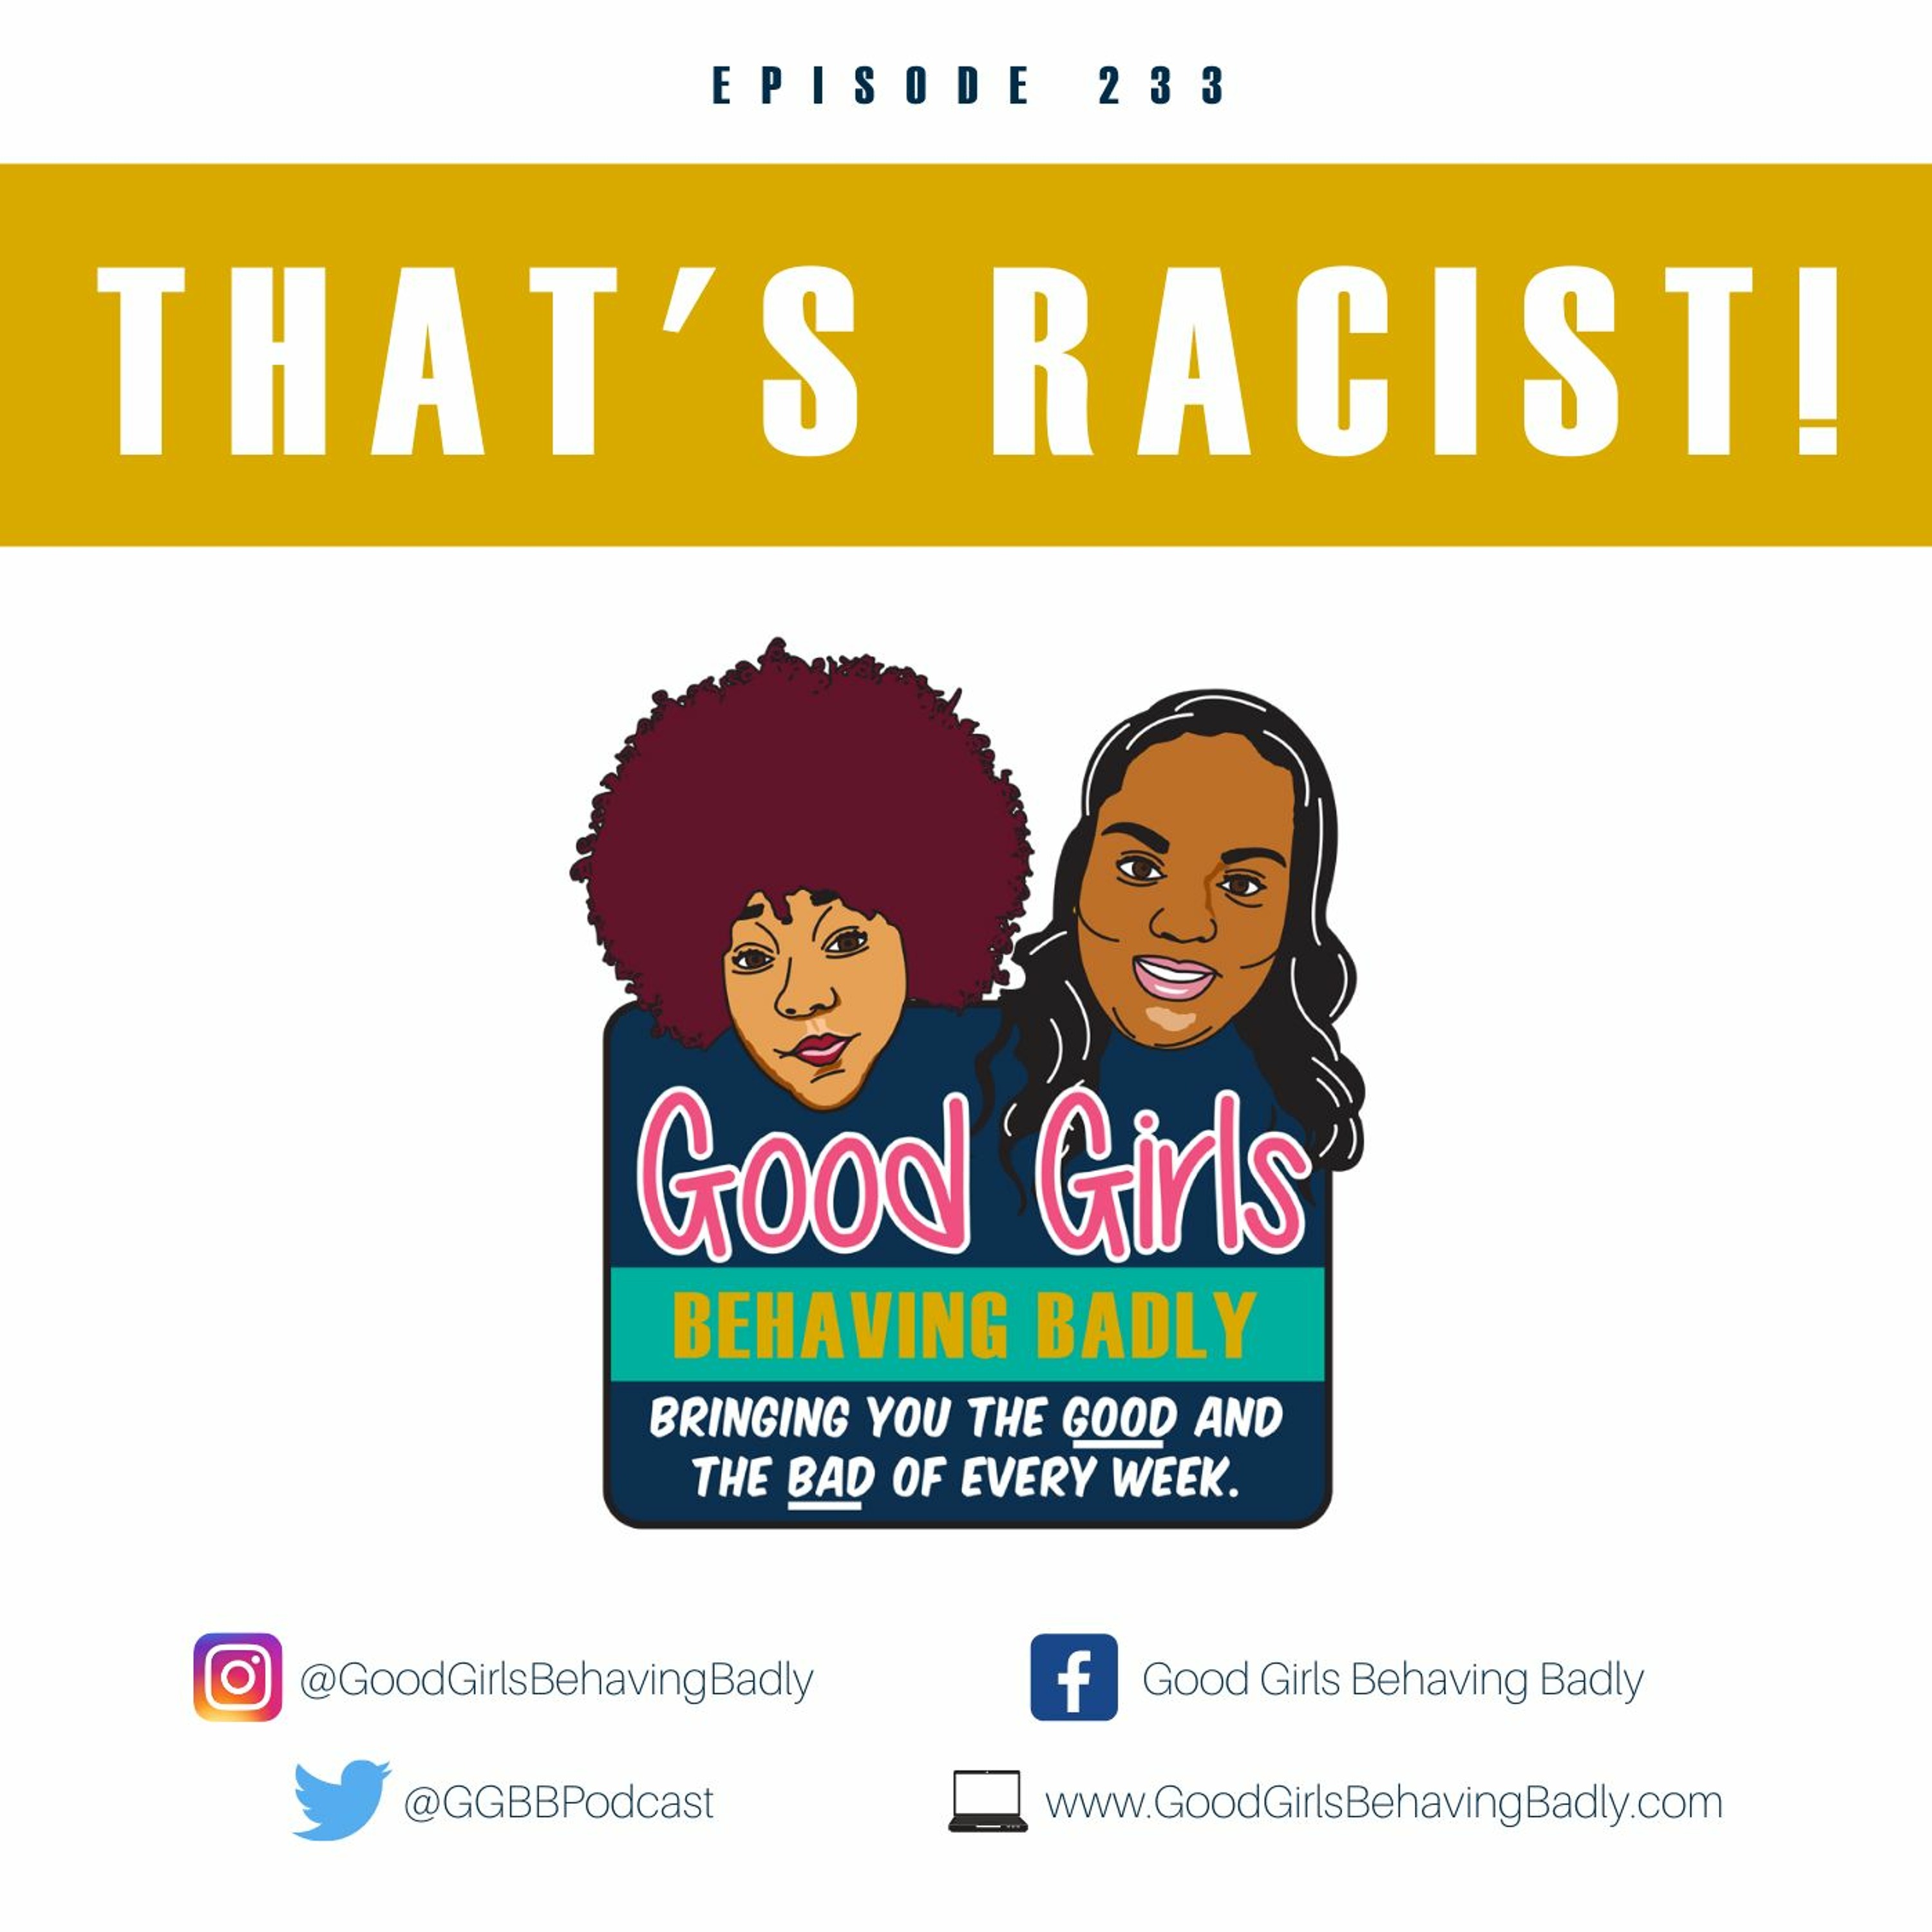 Episode 233: That’s Racist!